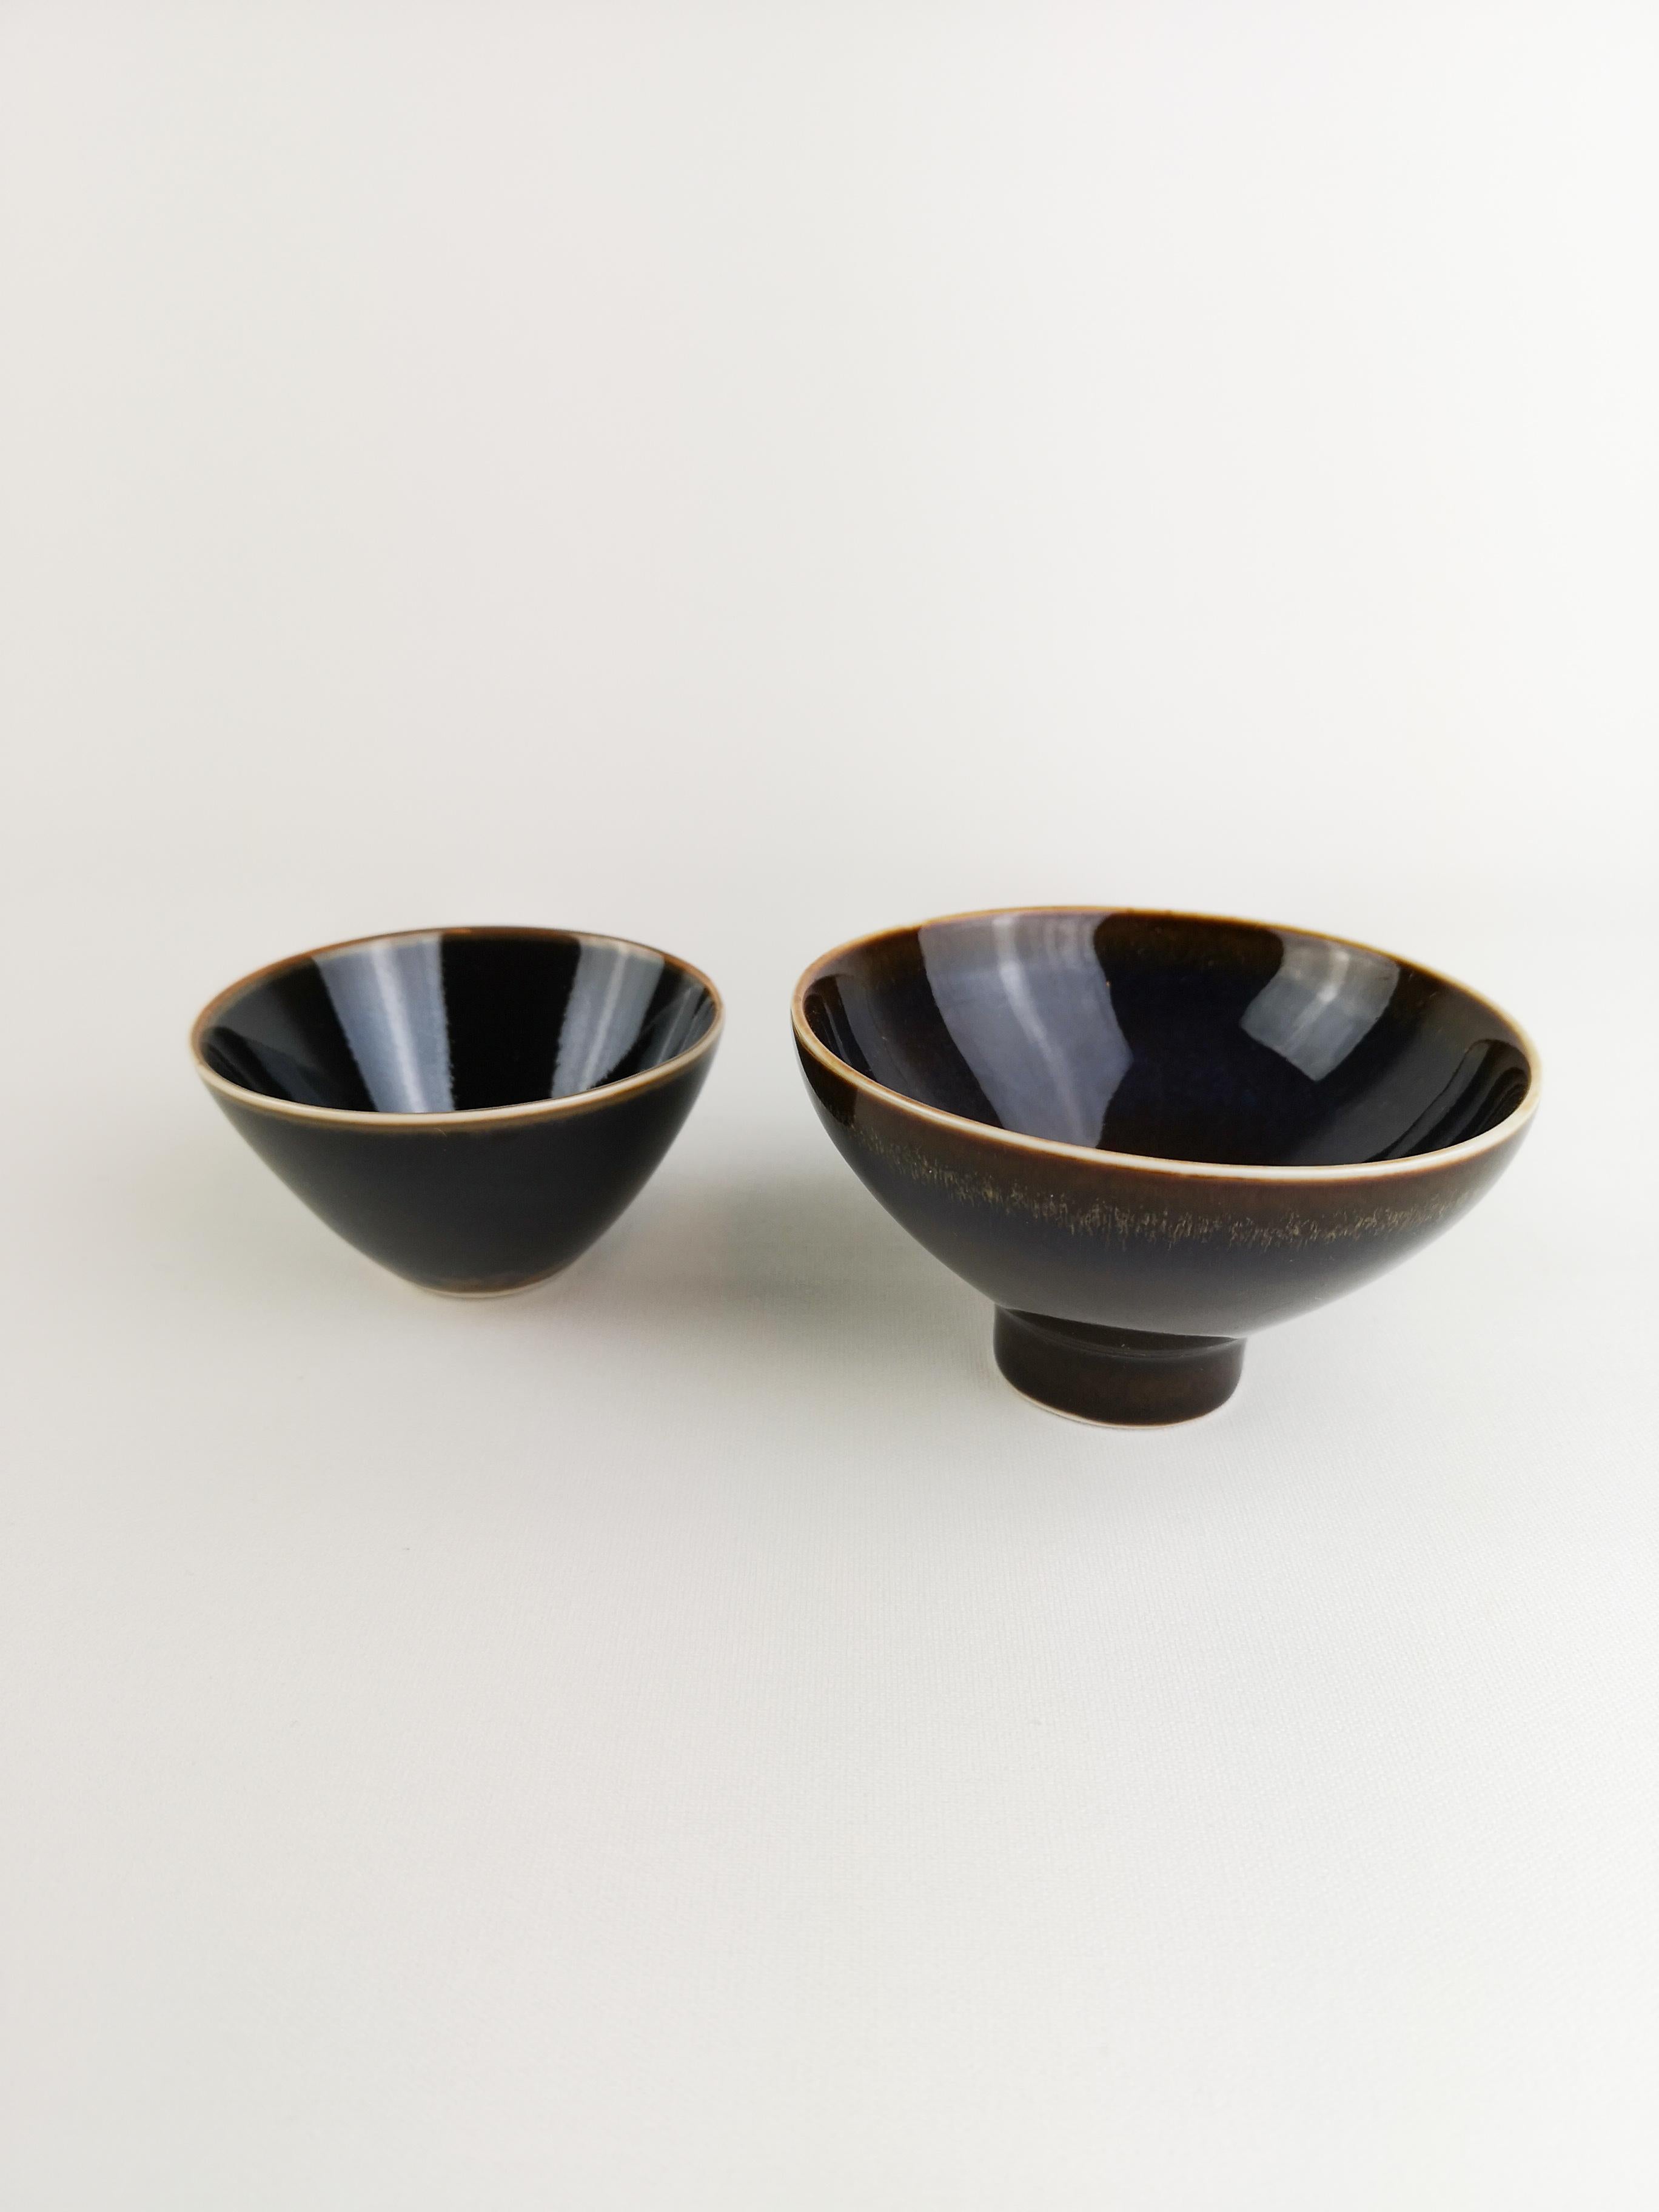 2 small bowls from Rörstrand and maker/Designer Carl Harry Stålhane. Made in Sweden in the midcentury. Beautiful glazed bowls in good condition.


 